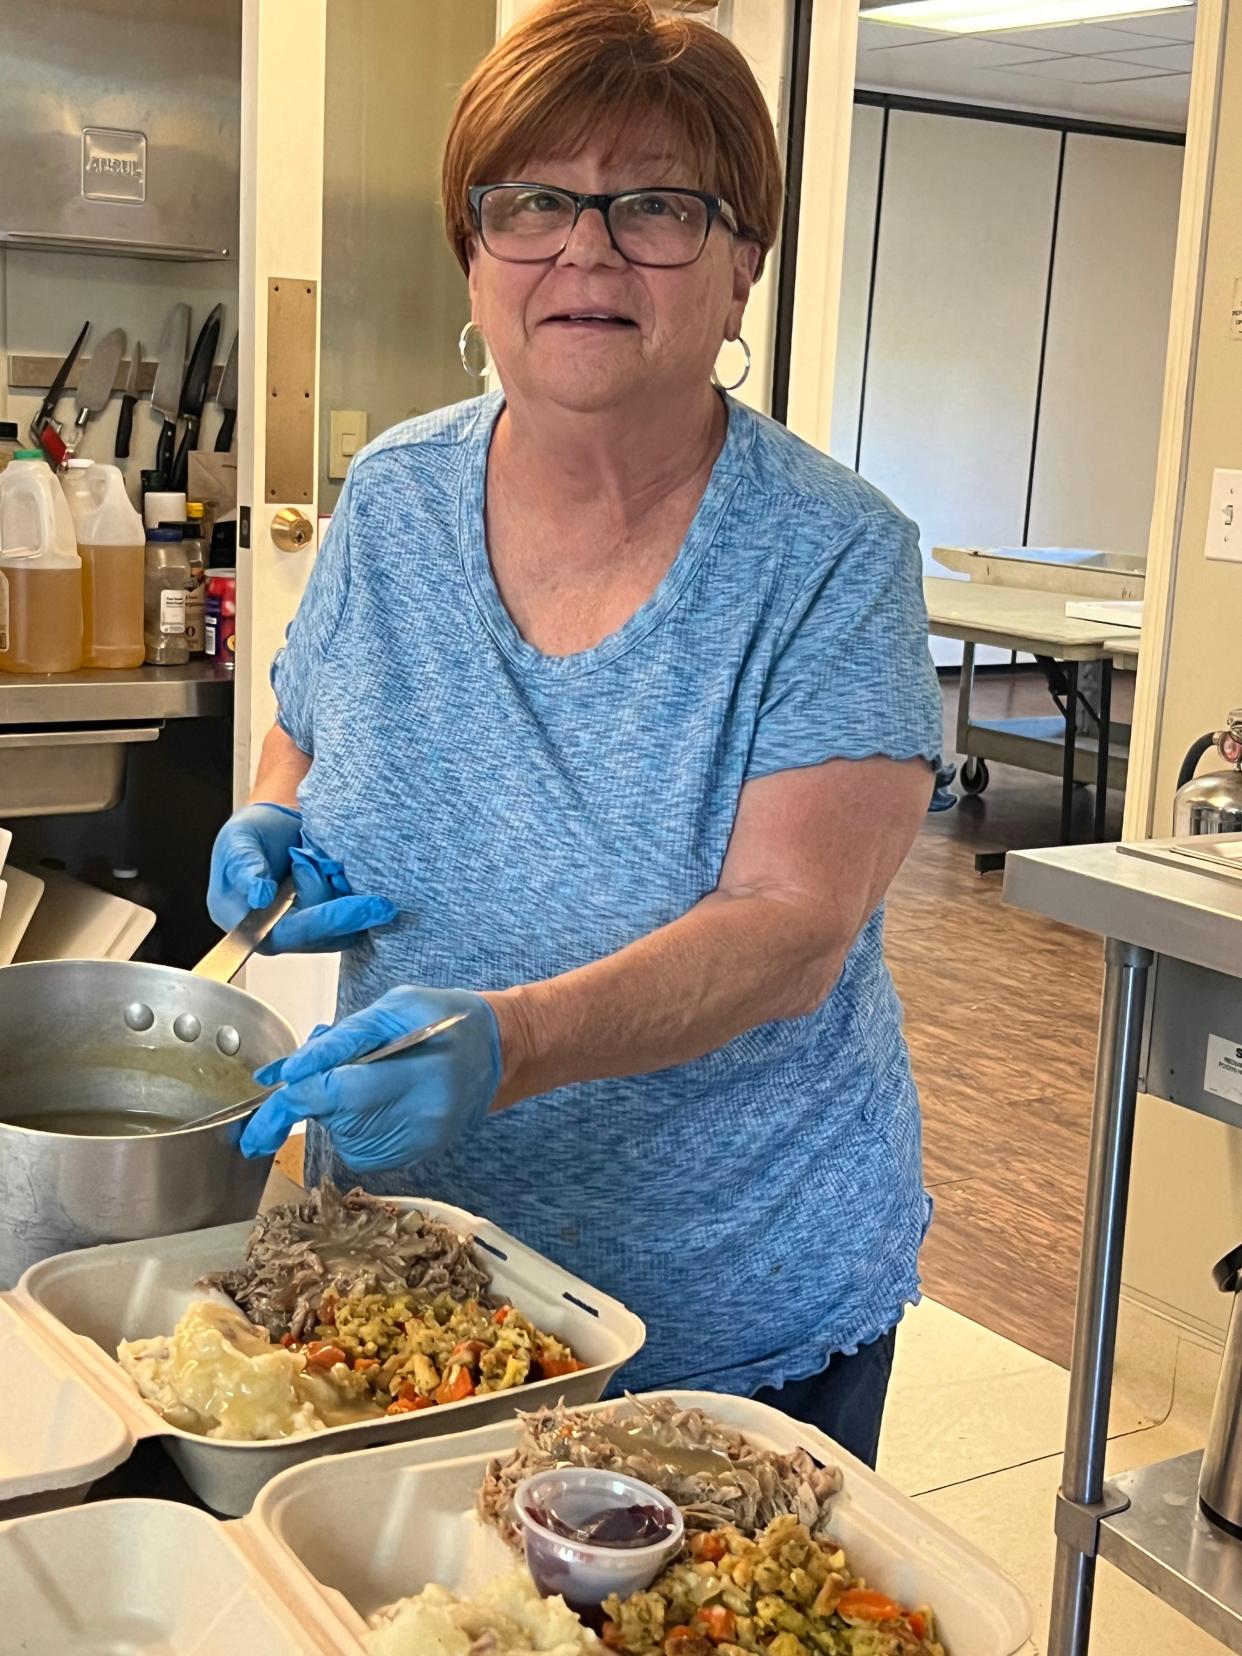 Gail Cullins is a volunteer for The Salvation Army in Ventura.